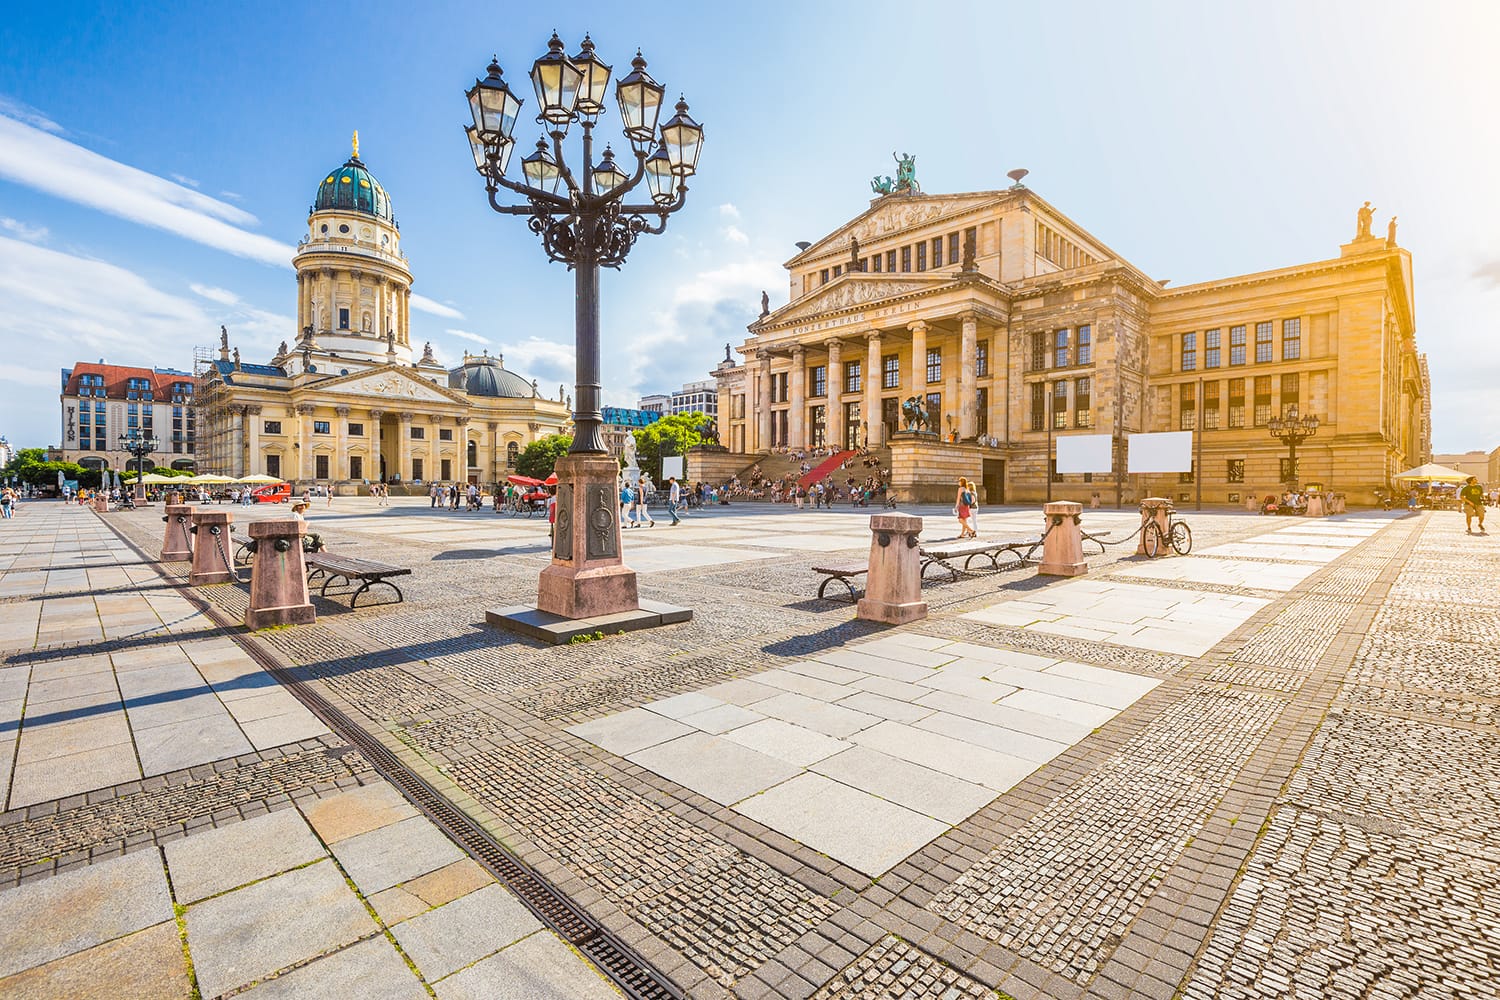 Panoramic view of famous Gendarmenmarkt square with Berlin Concert Hall and German Cathedral in golden evening light at sunset with blue sky and clouds in summer, Berlin Mitte district, Germany